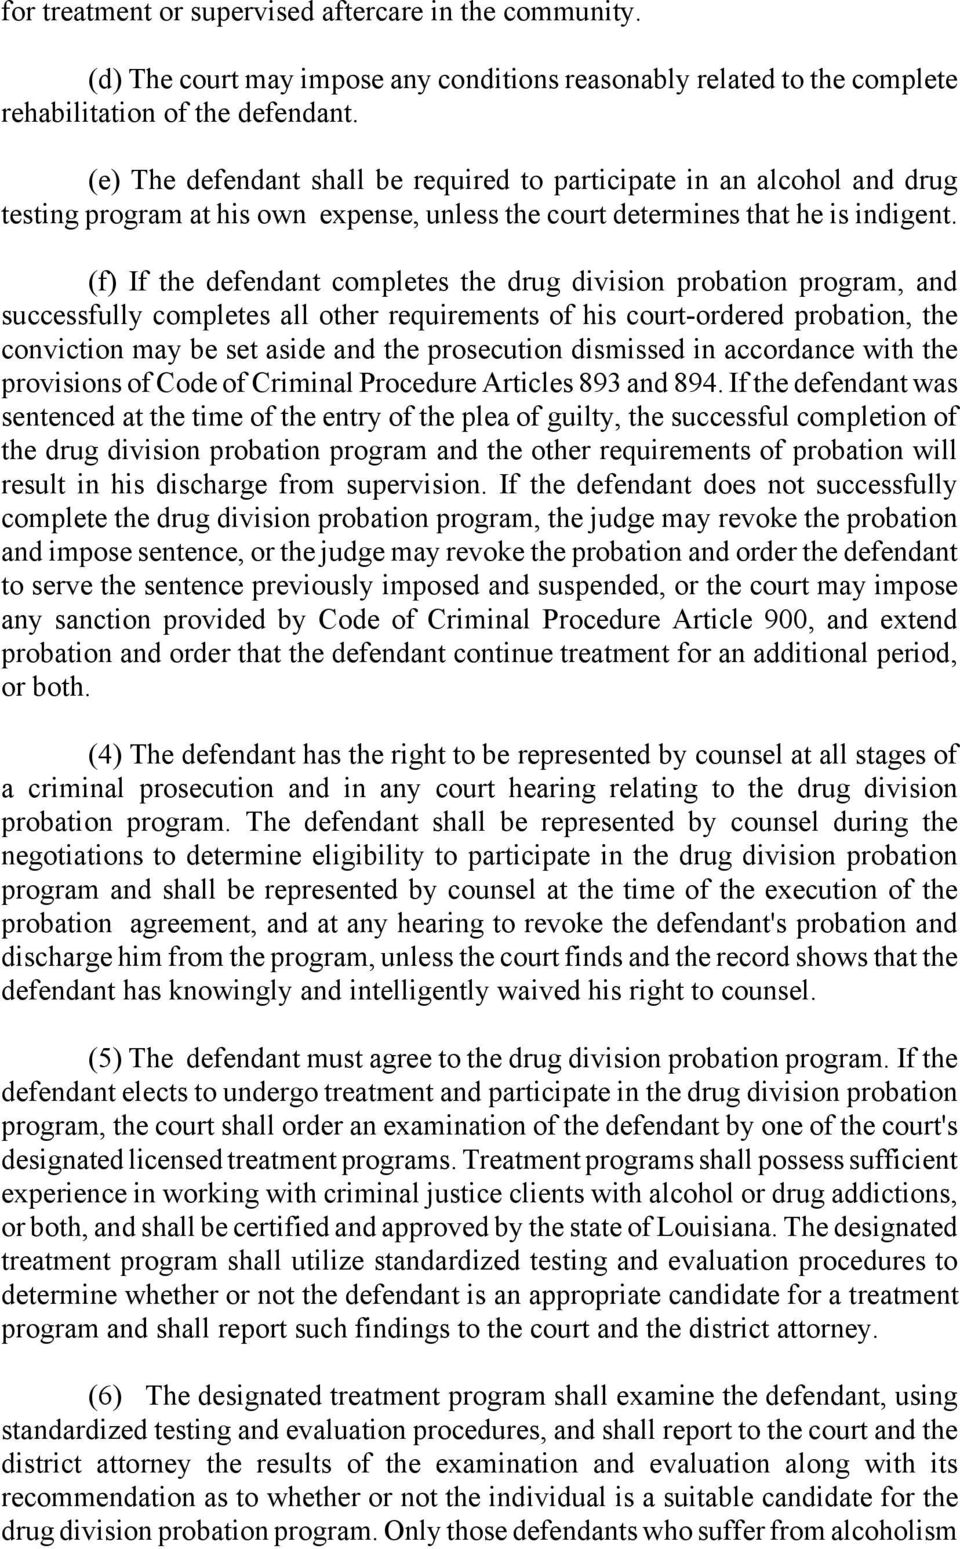 (f) If the defendant completes the drug division probation program, and successfully completes all other requirements of his court-ordered probation, the conviction may be set aside and the